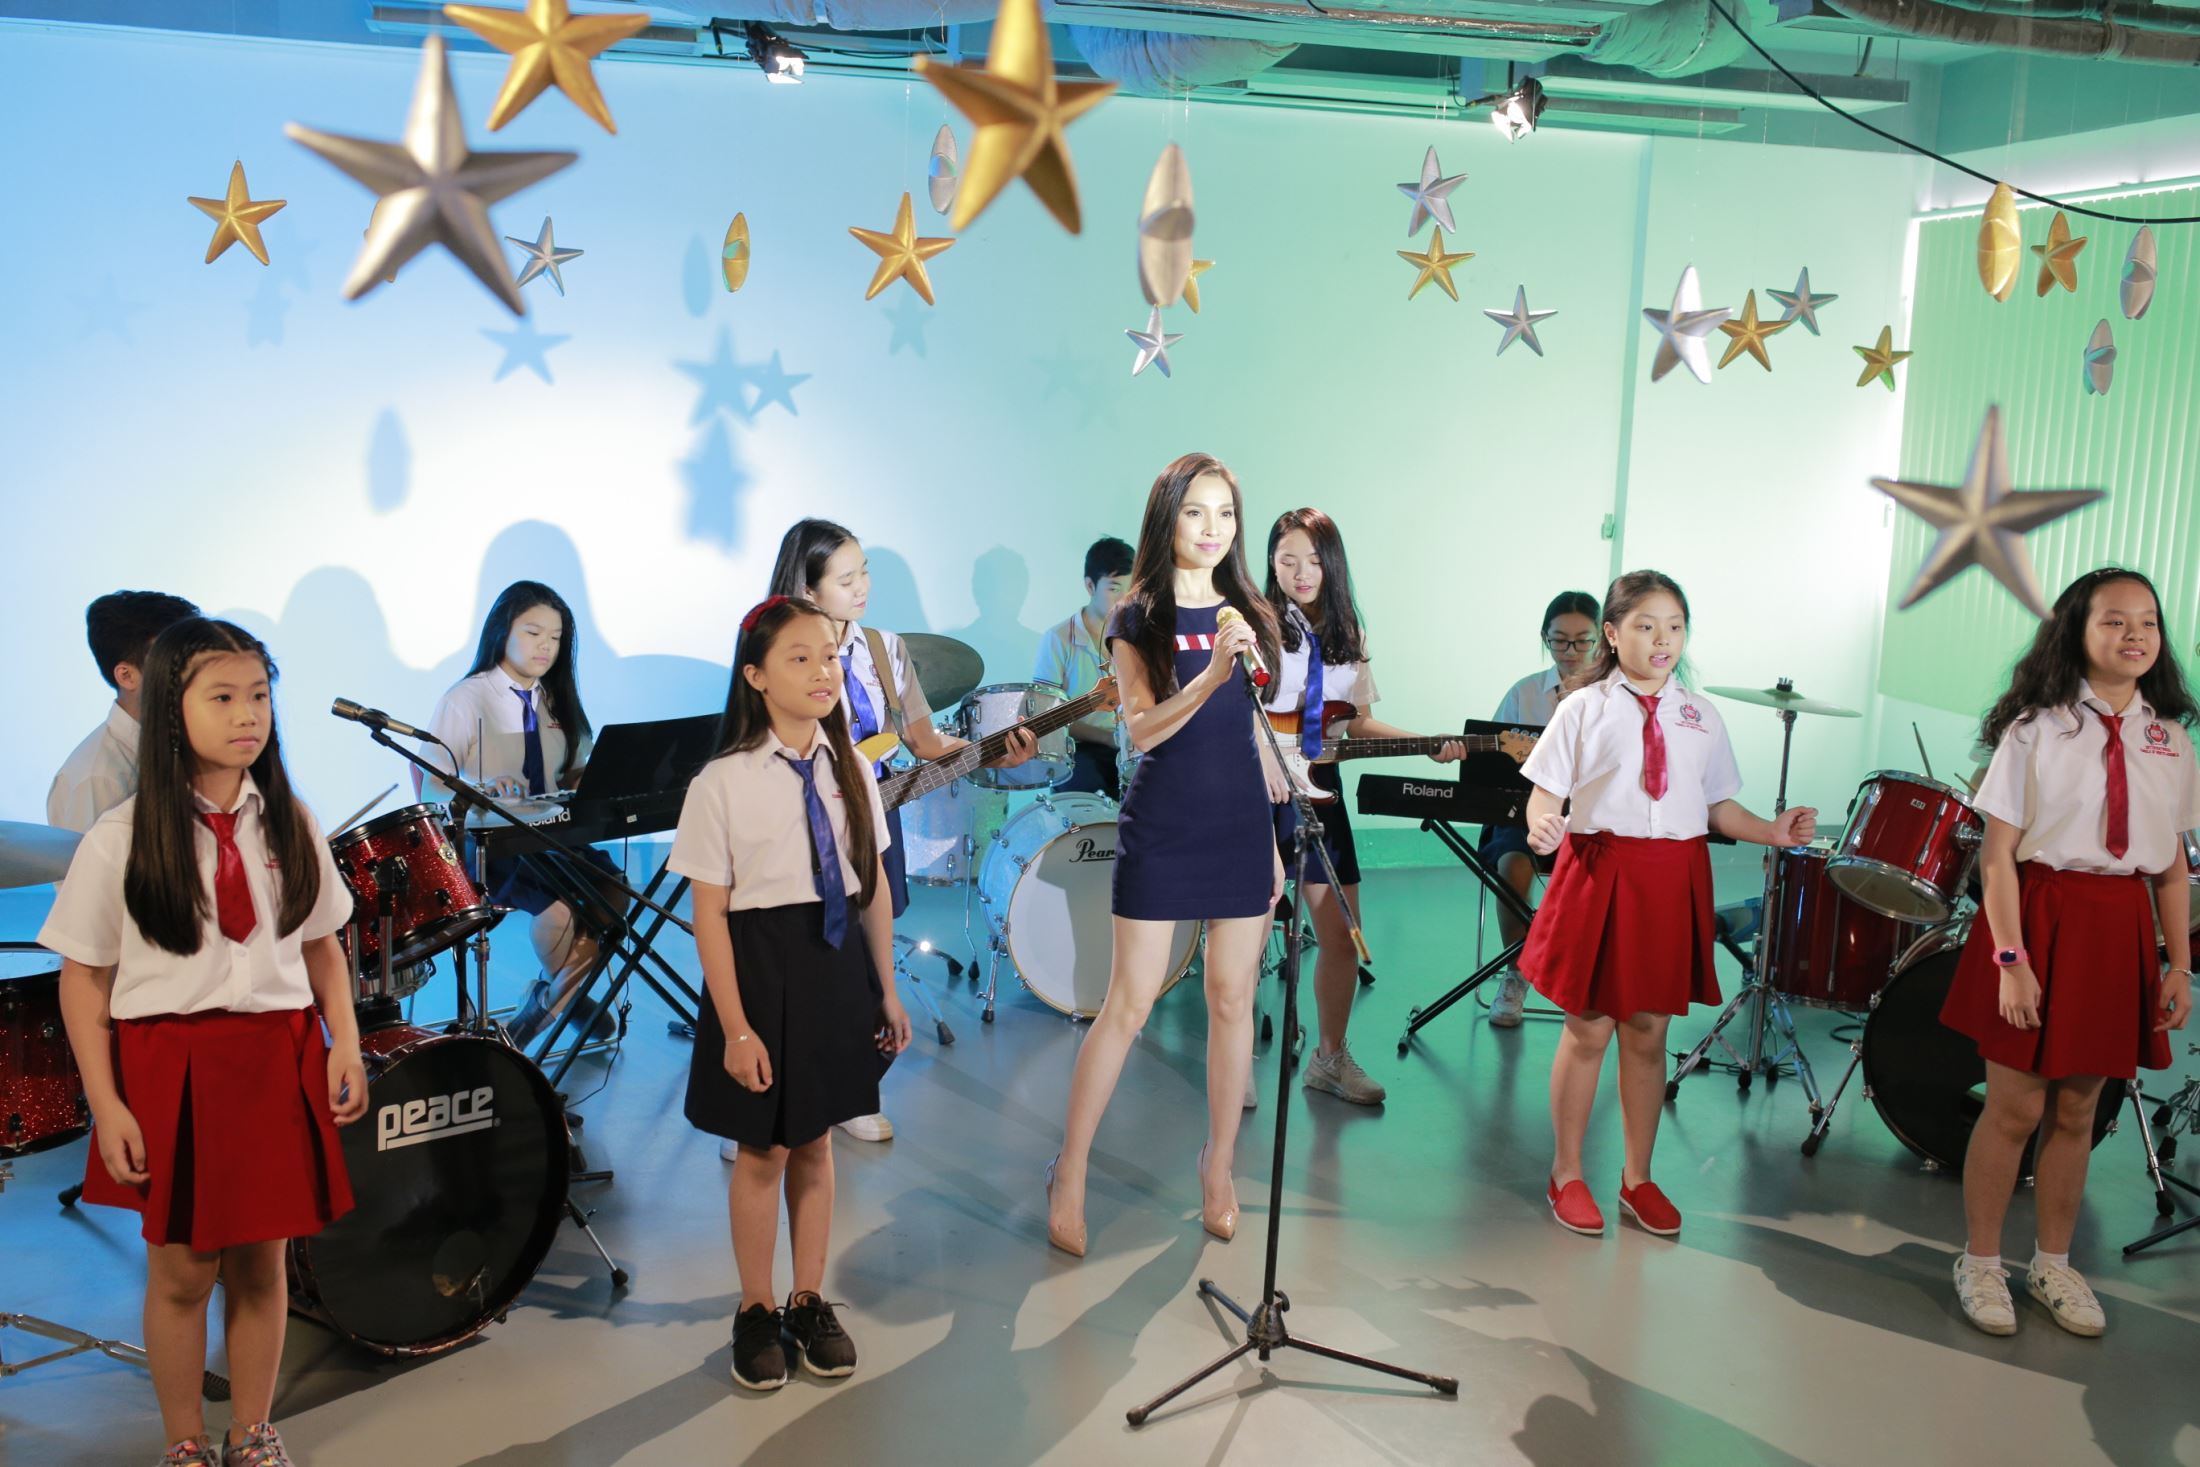 Hien Thuc and students of Nguyen Hoang educational system in the new song